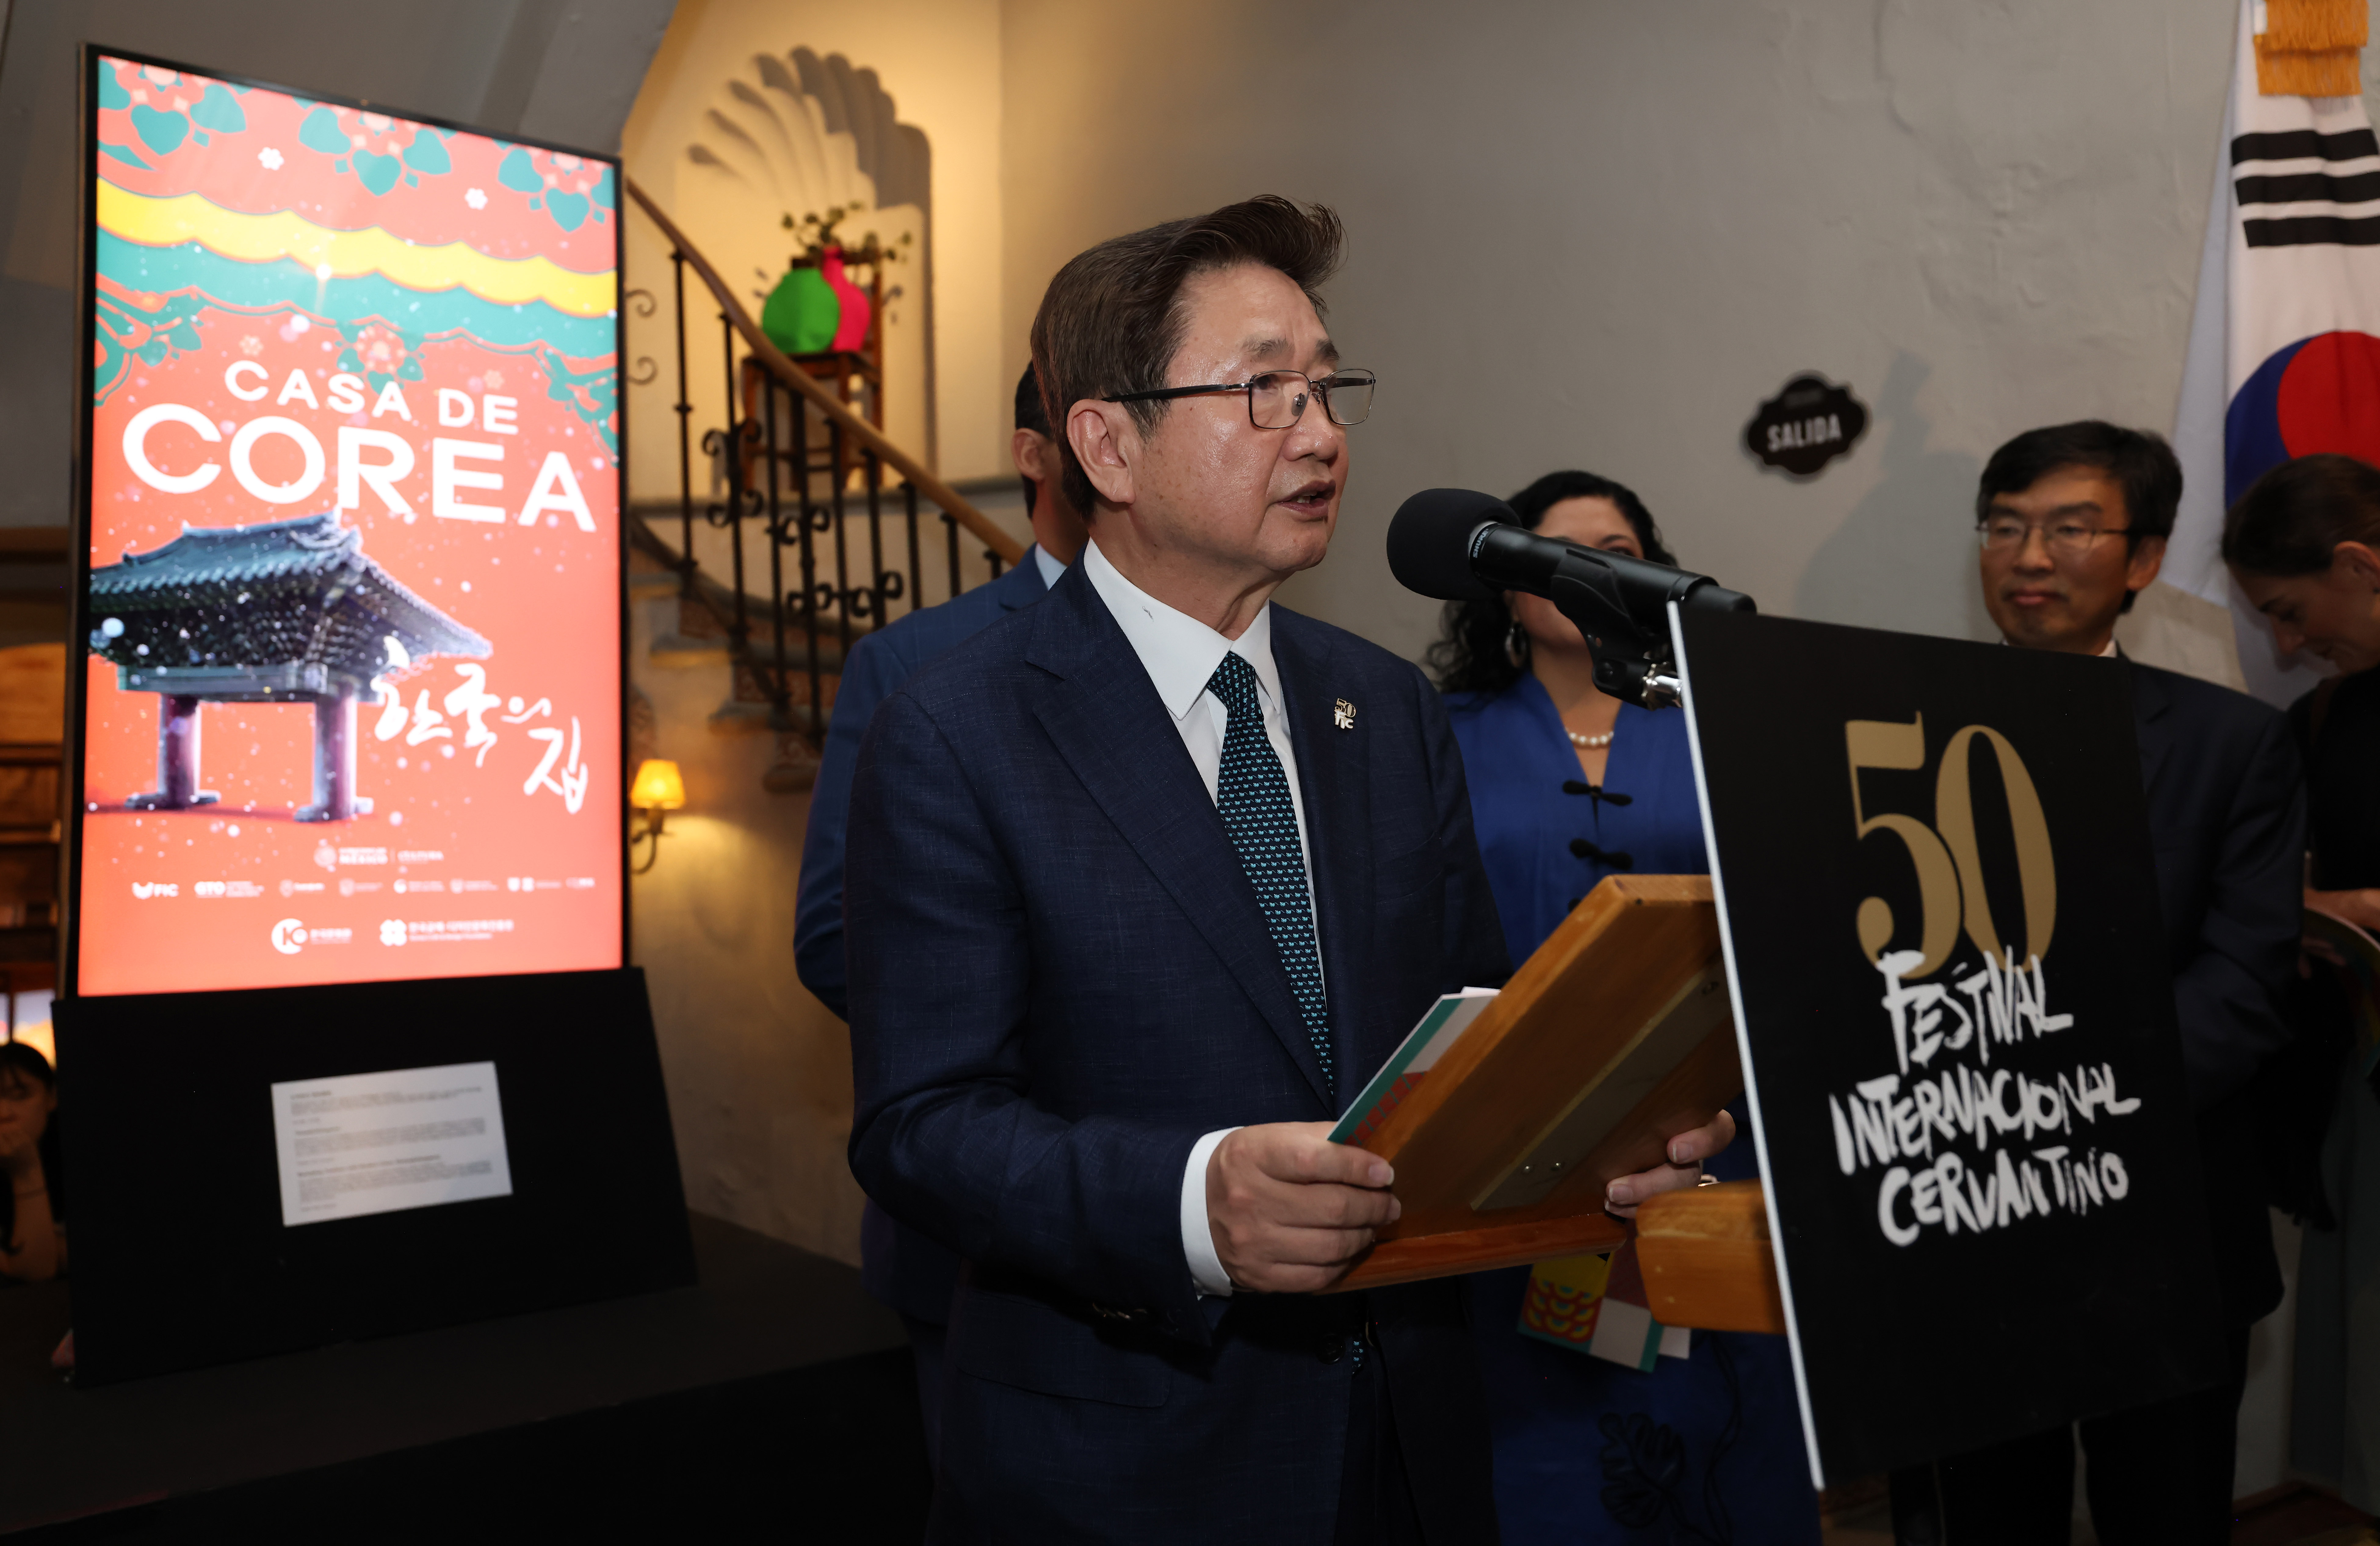 Minister of Culture, Sports and Tourism Park Bo Gyoon on Oct. 12 gives a congratulatory speech at the opening ceremony of Casa de Corea (Korea House) in Guanajuato, Mexico. 